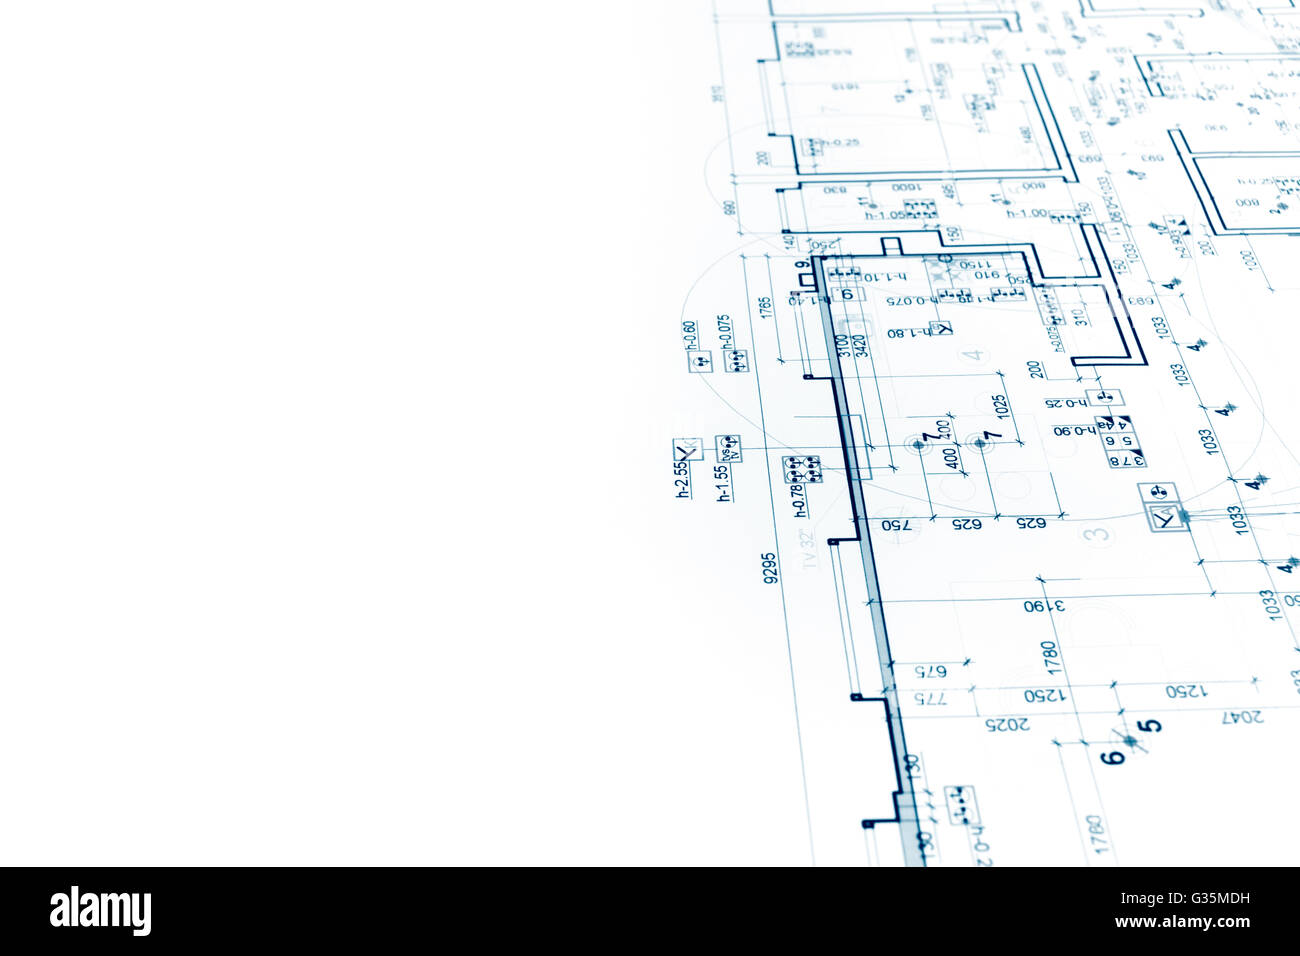 blueprint floor plan, architectural drawing, construction background Stock Photo